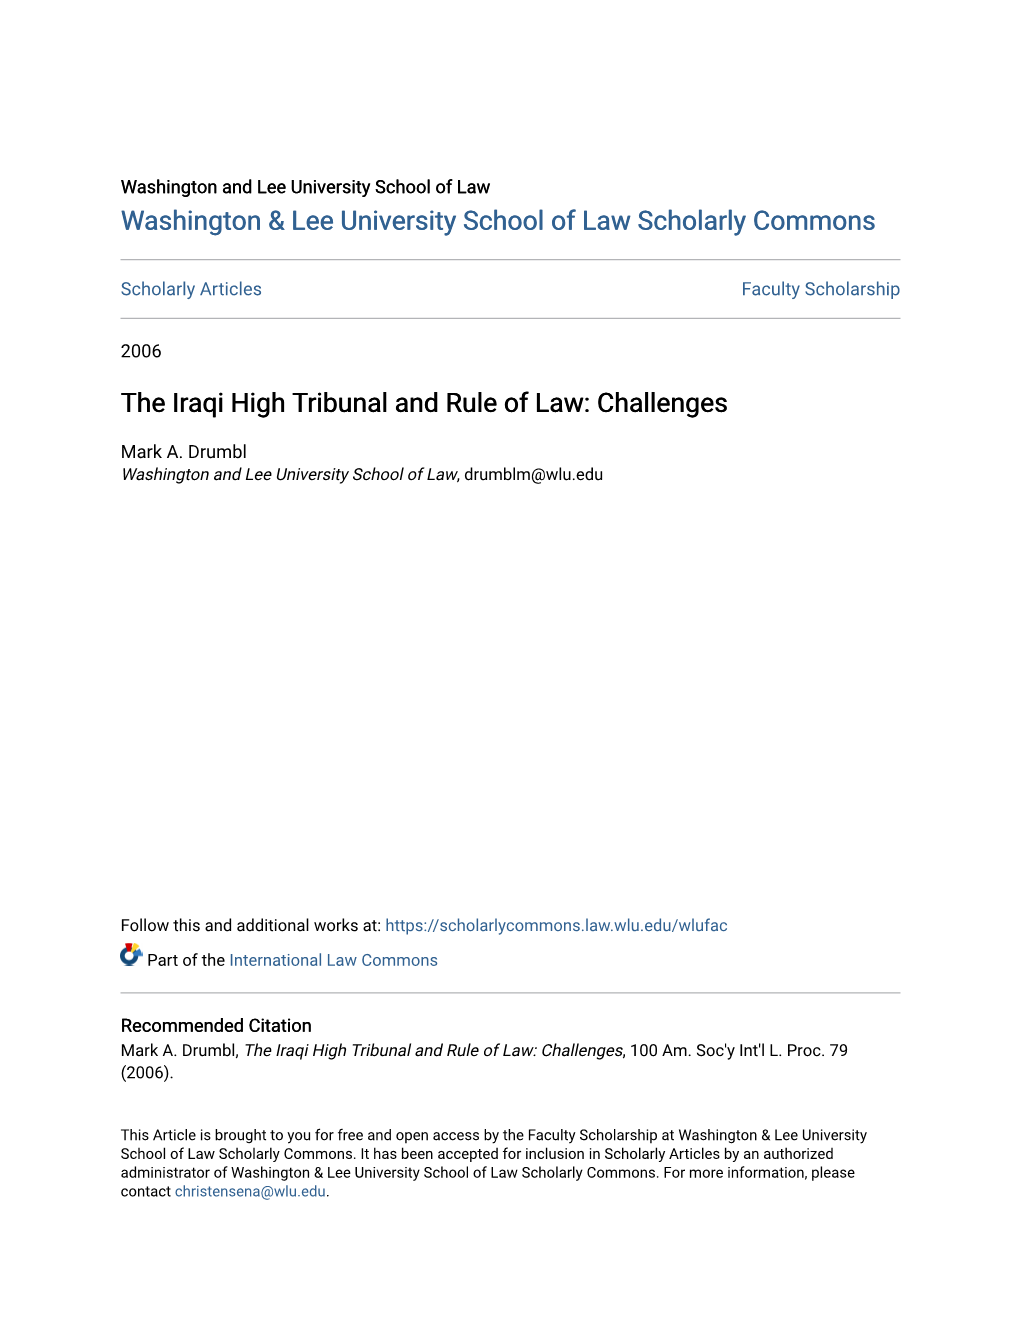 The Iraqi High Tribunal and Rule of Law: Challenges